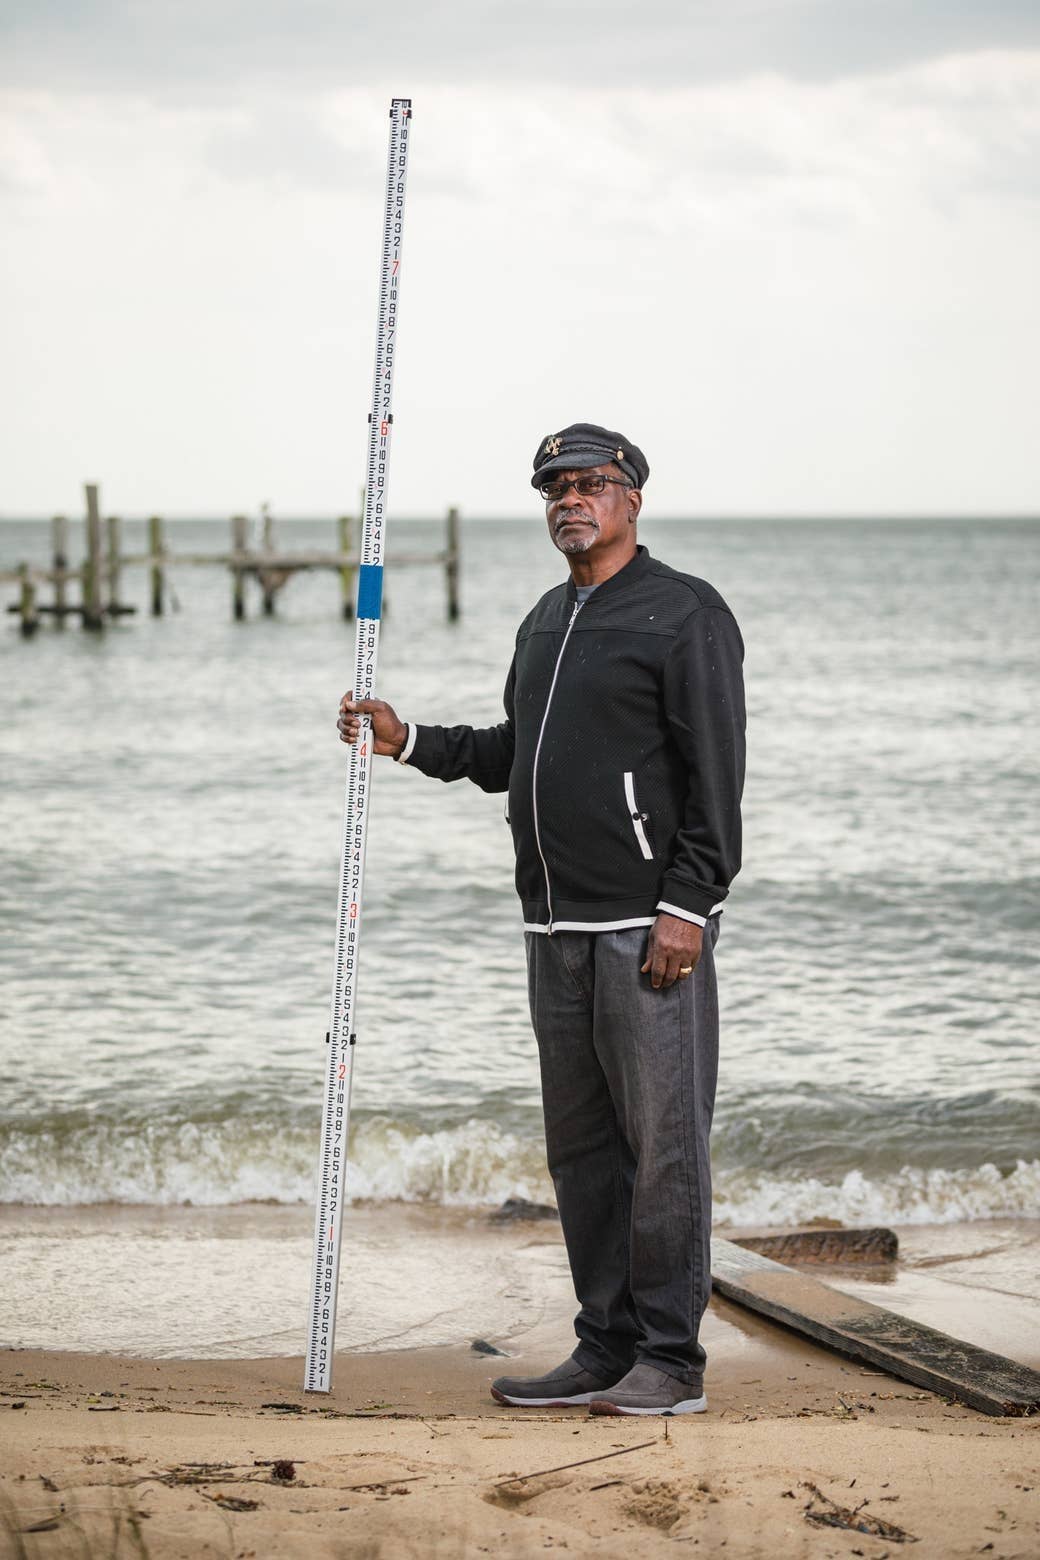 A man standing at the beach holding a long measuring stick with a taped marking at his shoulders